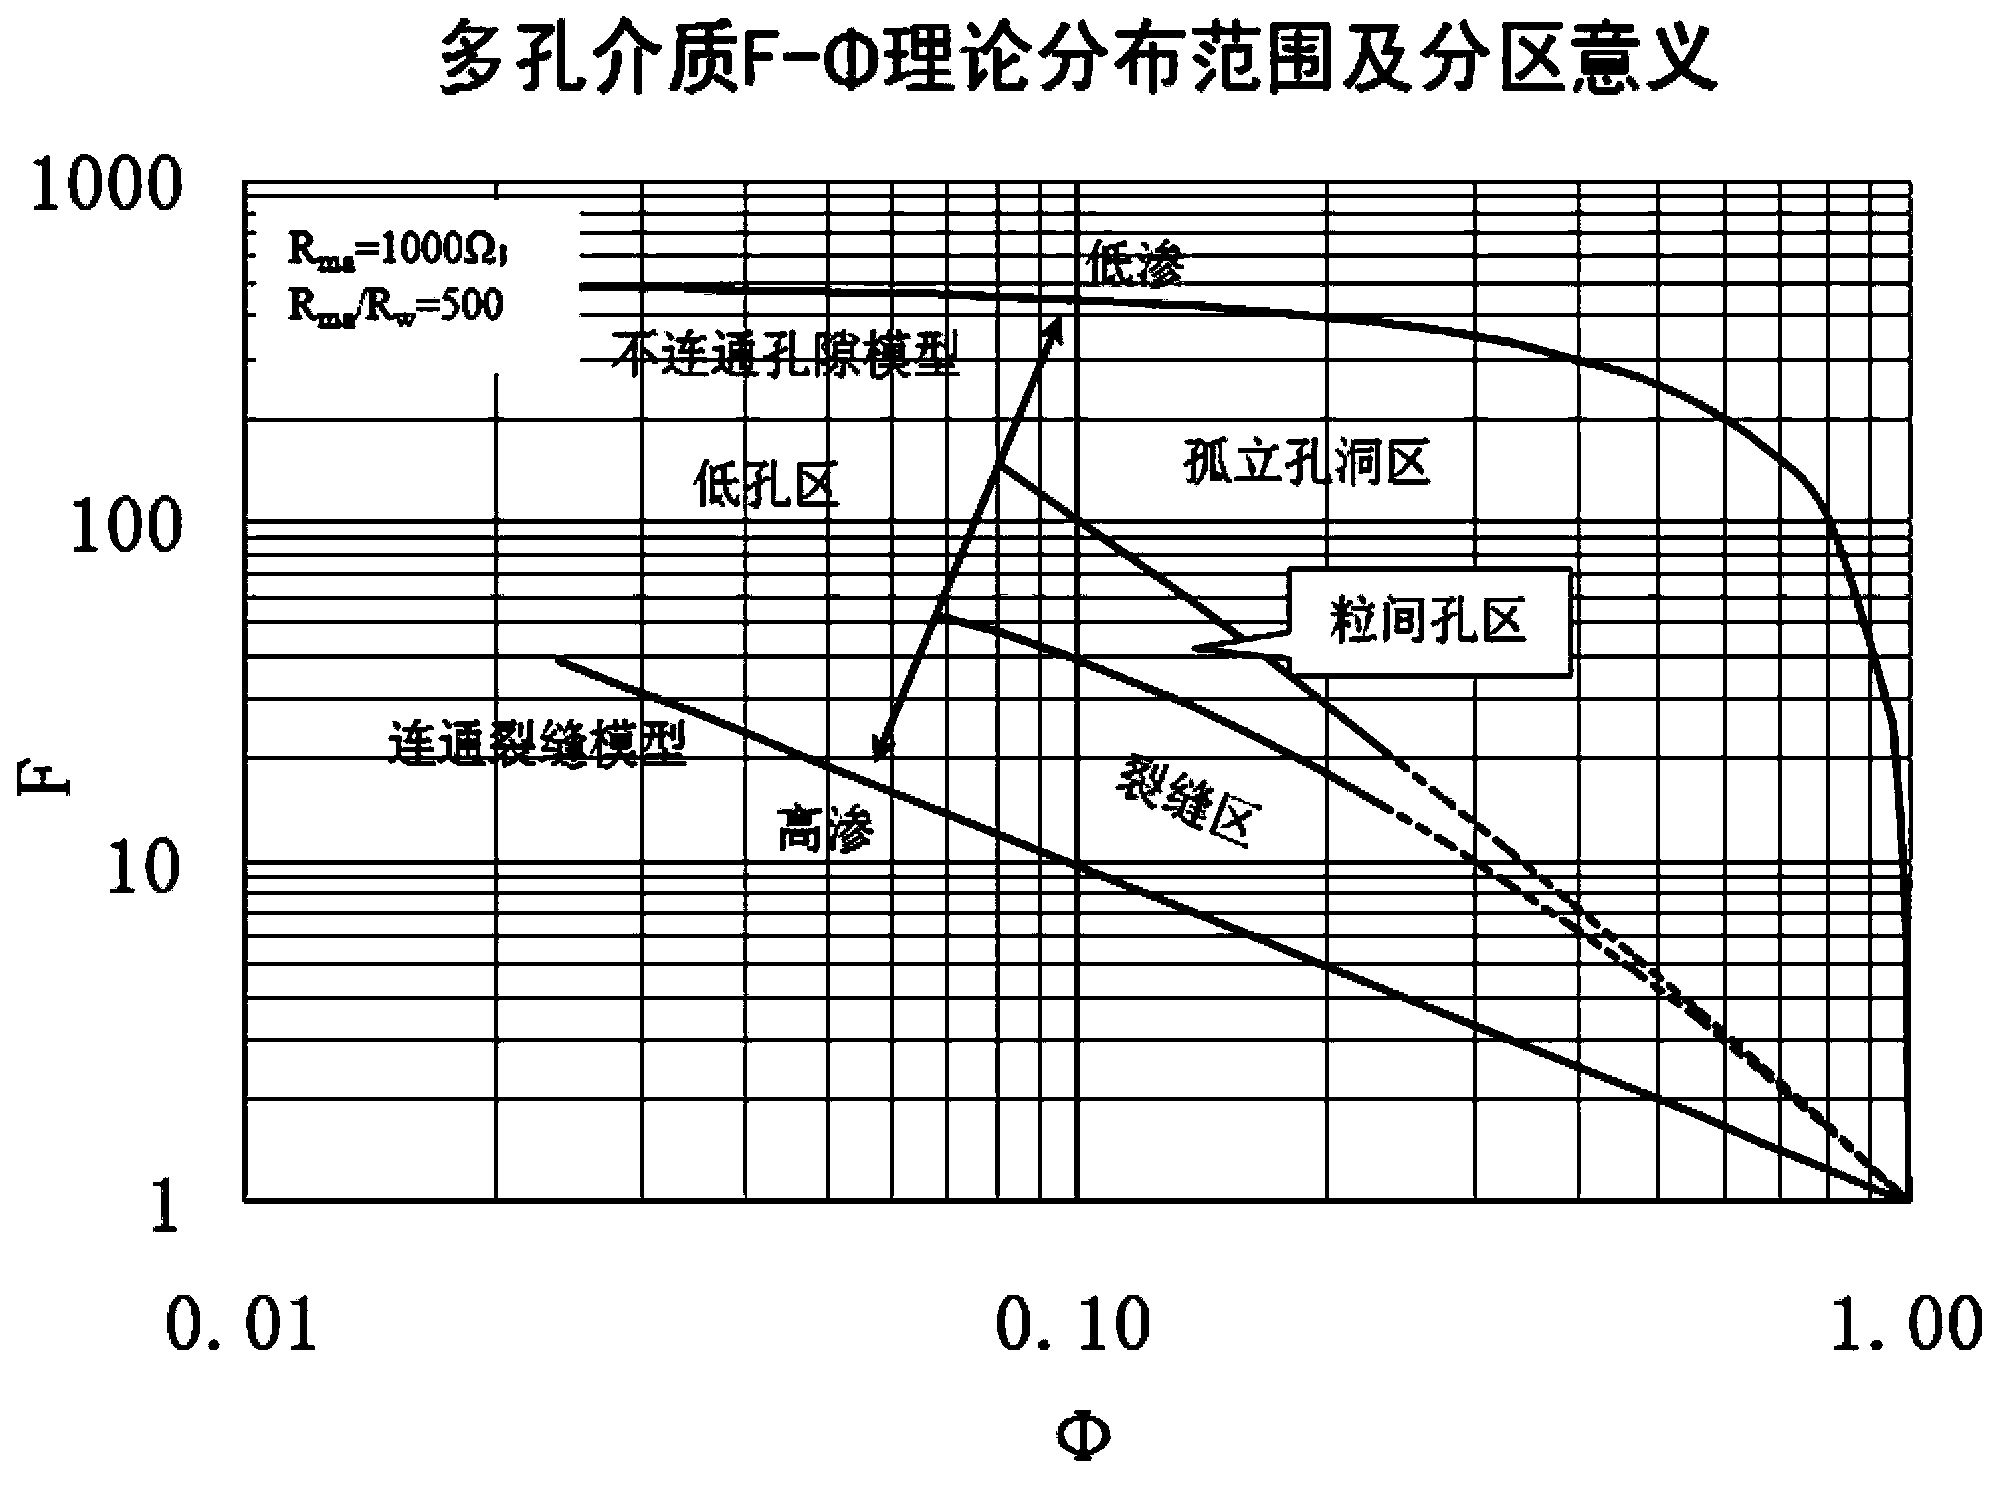 Reservoir classification method based on rock electricity parameters